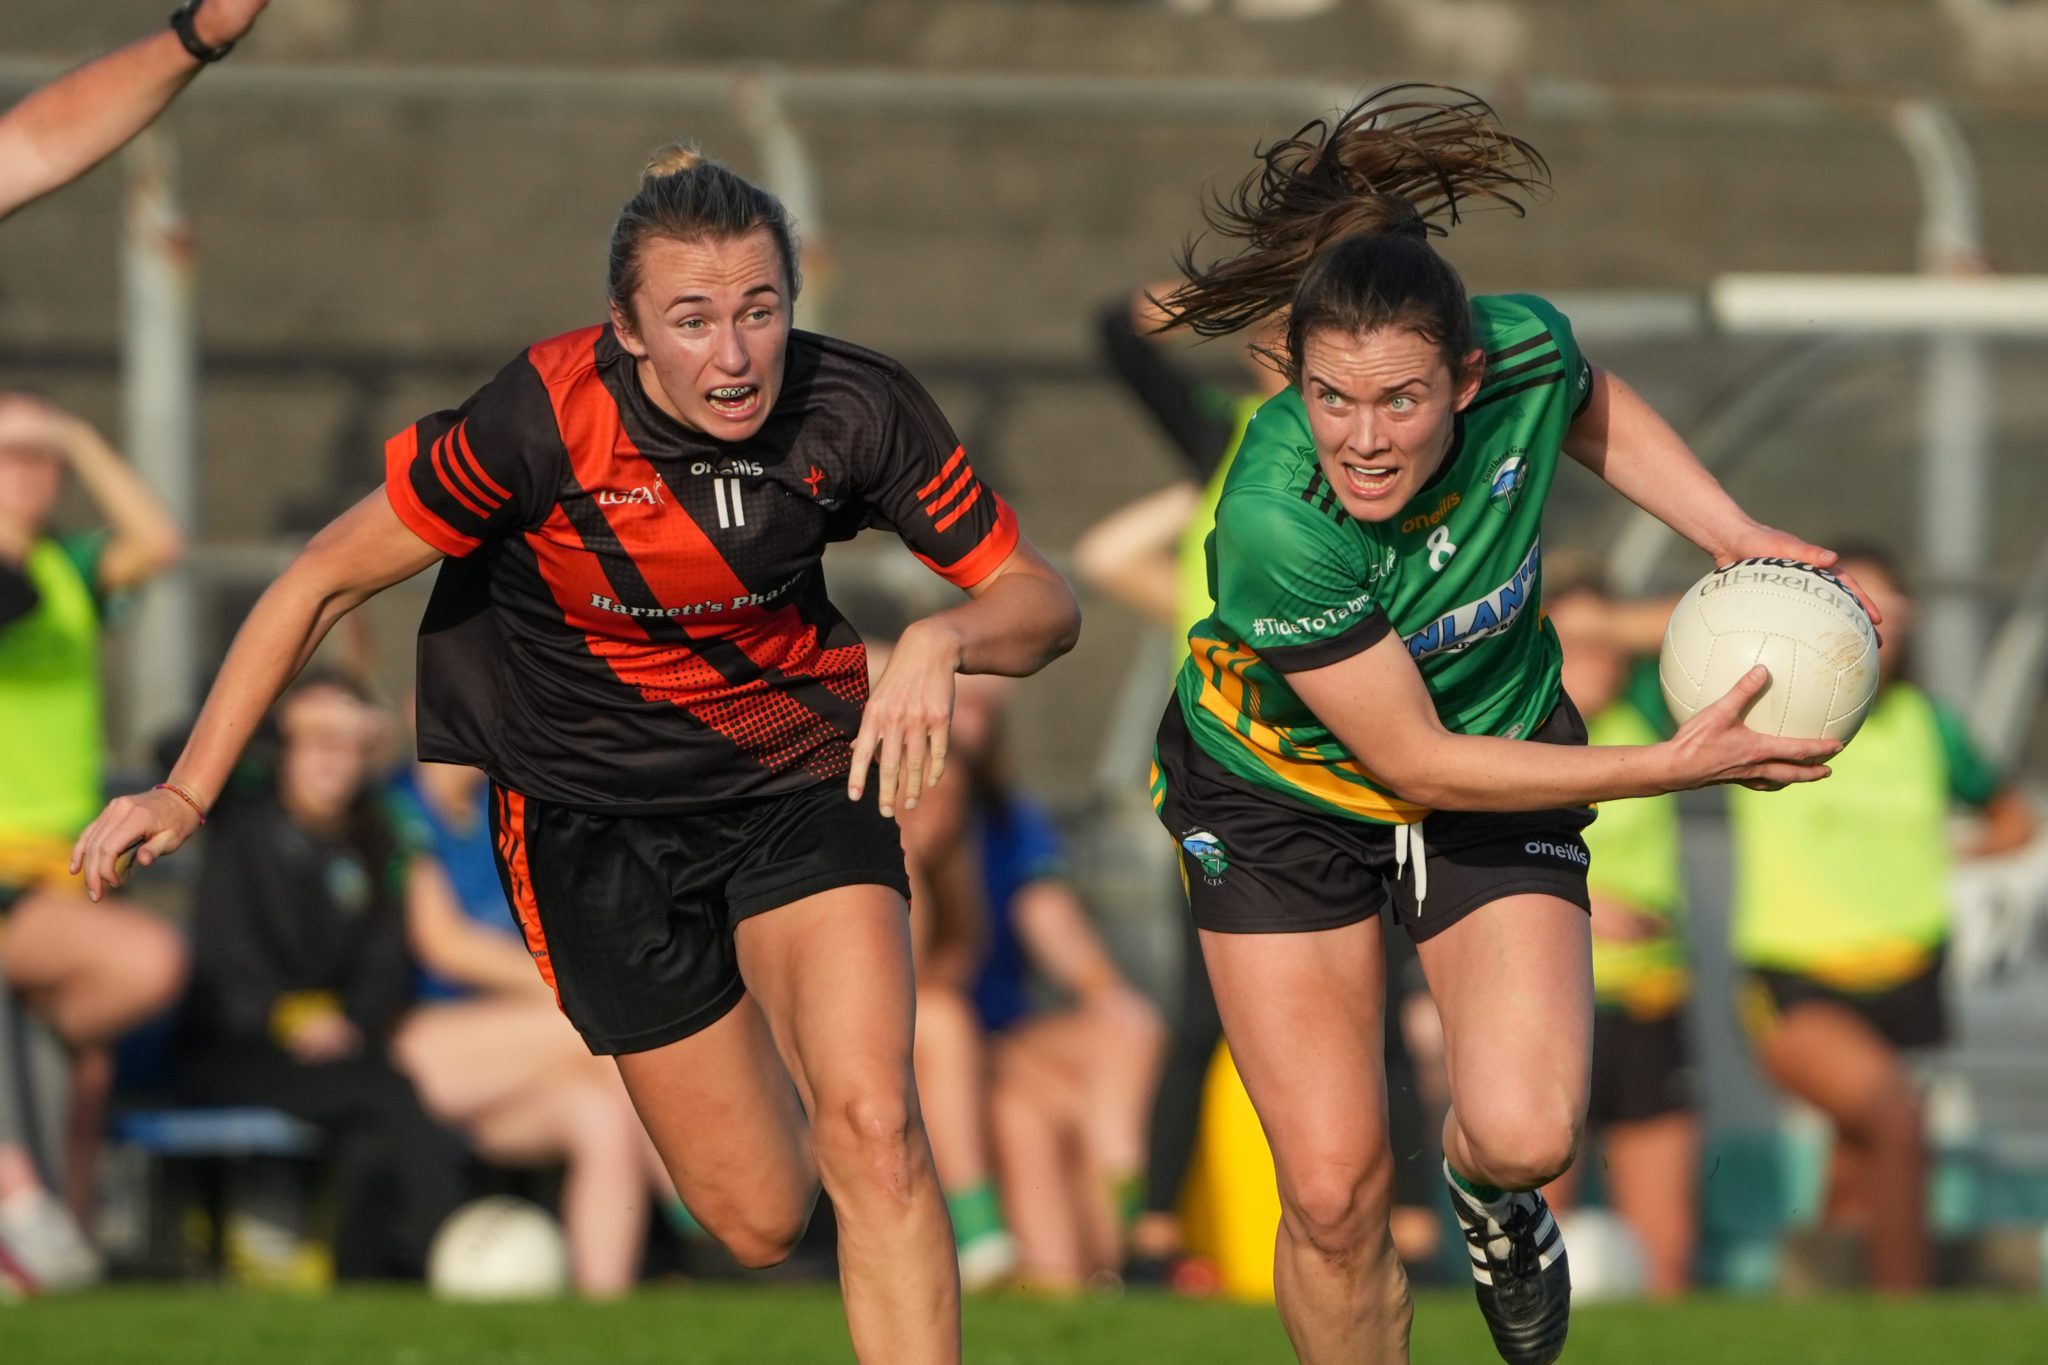 Southern Gaels LGFA's Anna Galvin in action against Finuge/St. Senans LGFA's Niamh Carmody in the Bons Secours Ladies Senior Football Championship Final | Photo by David Corkey Radio Kerry Sport